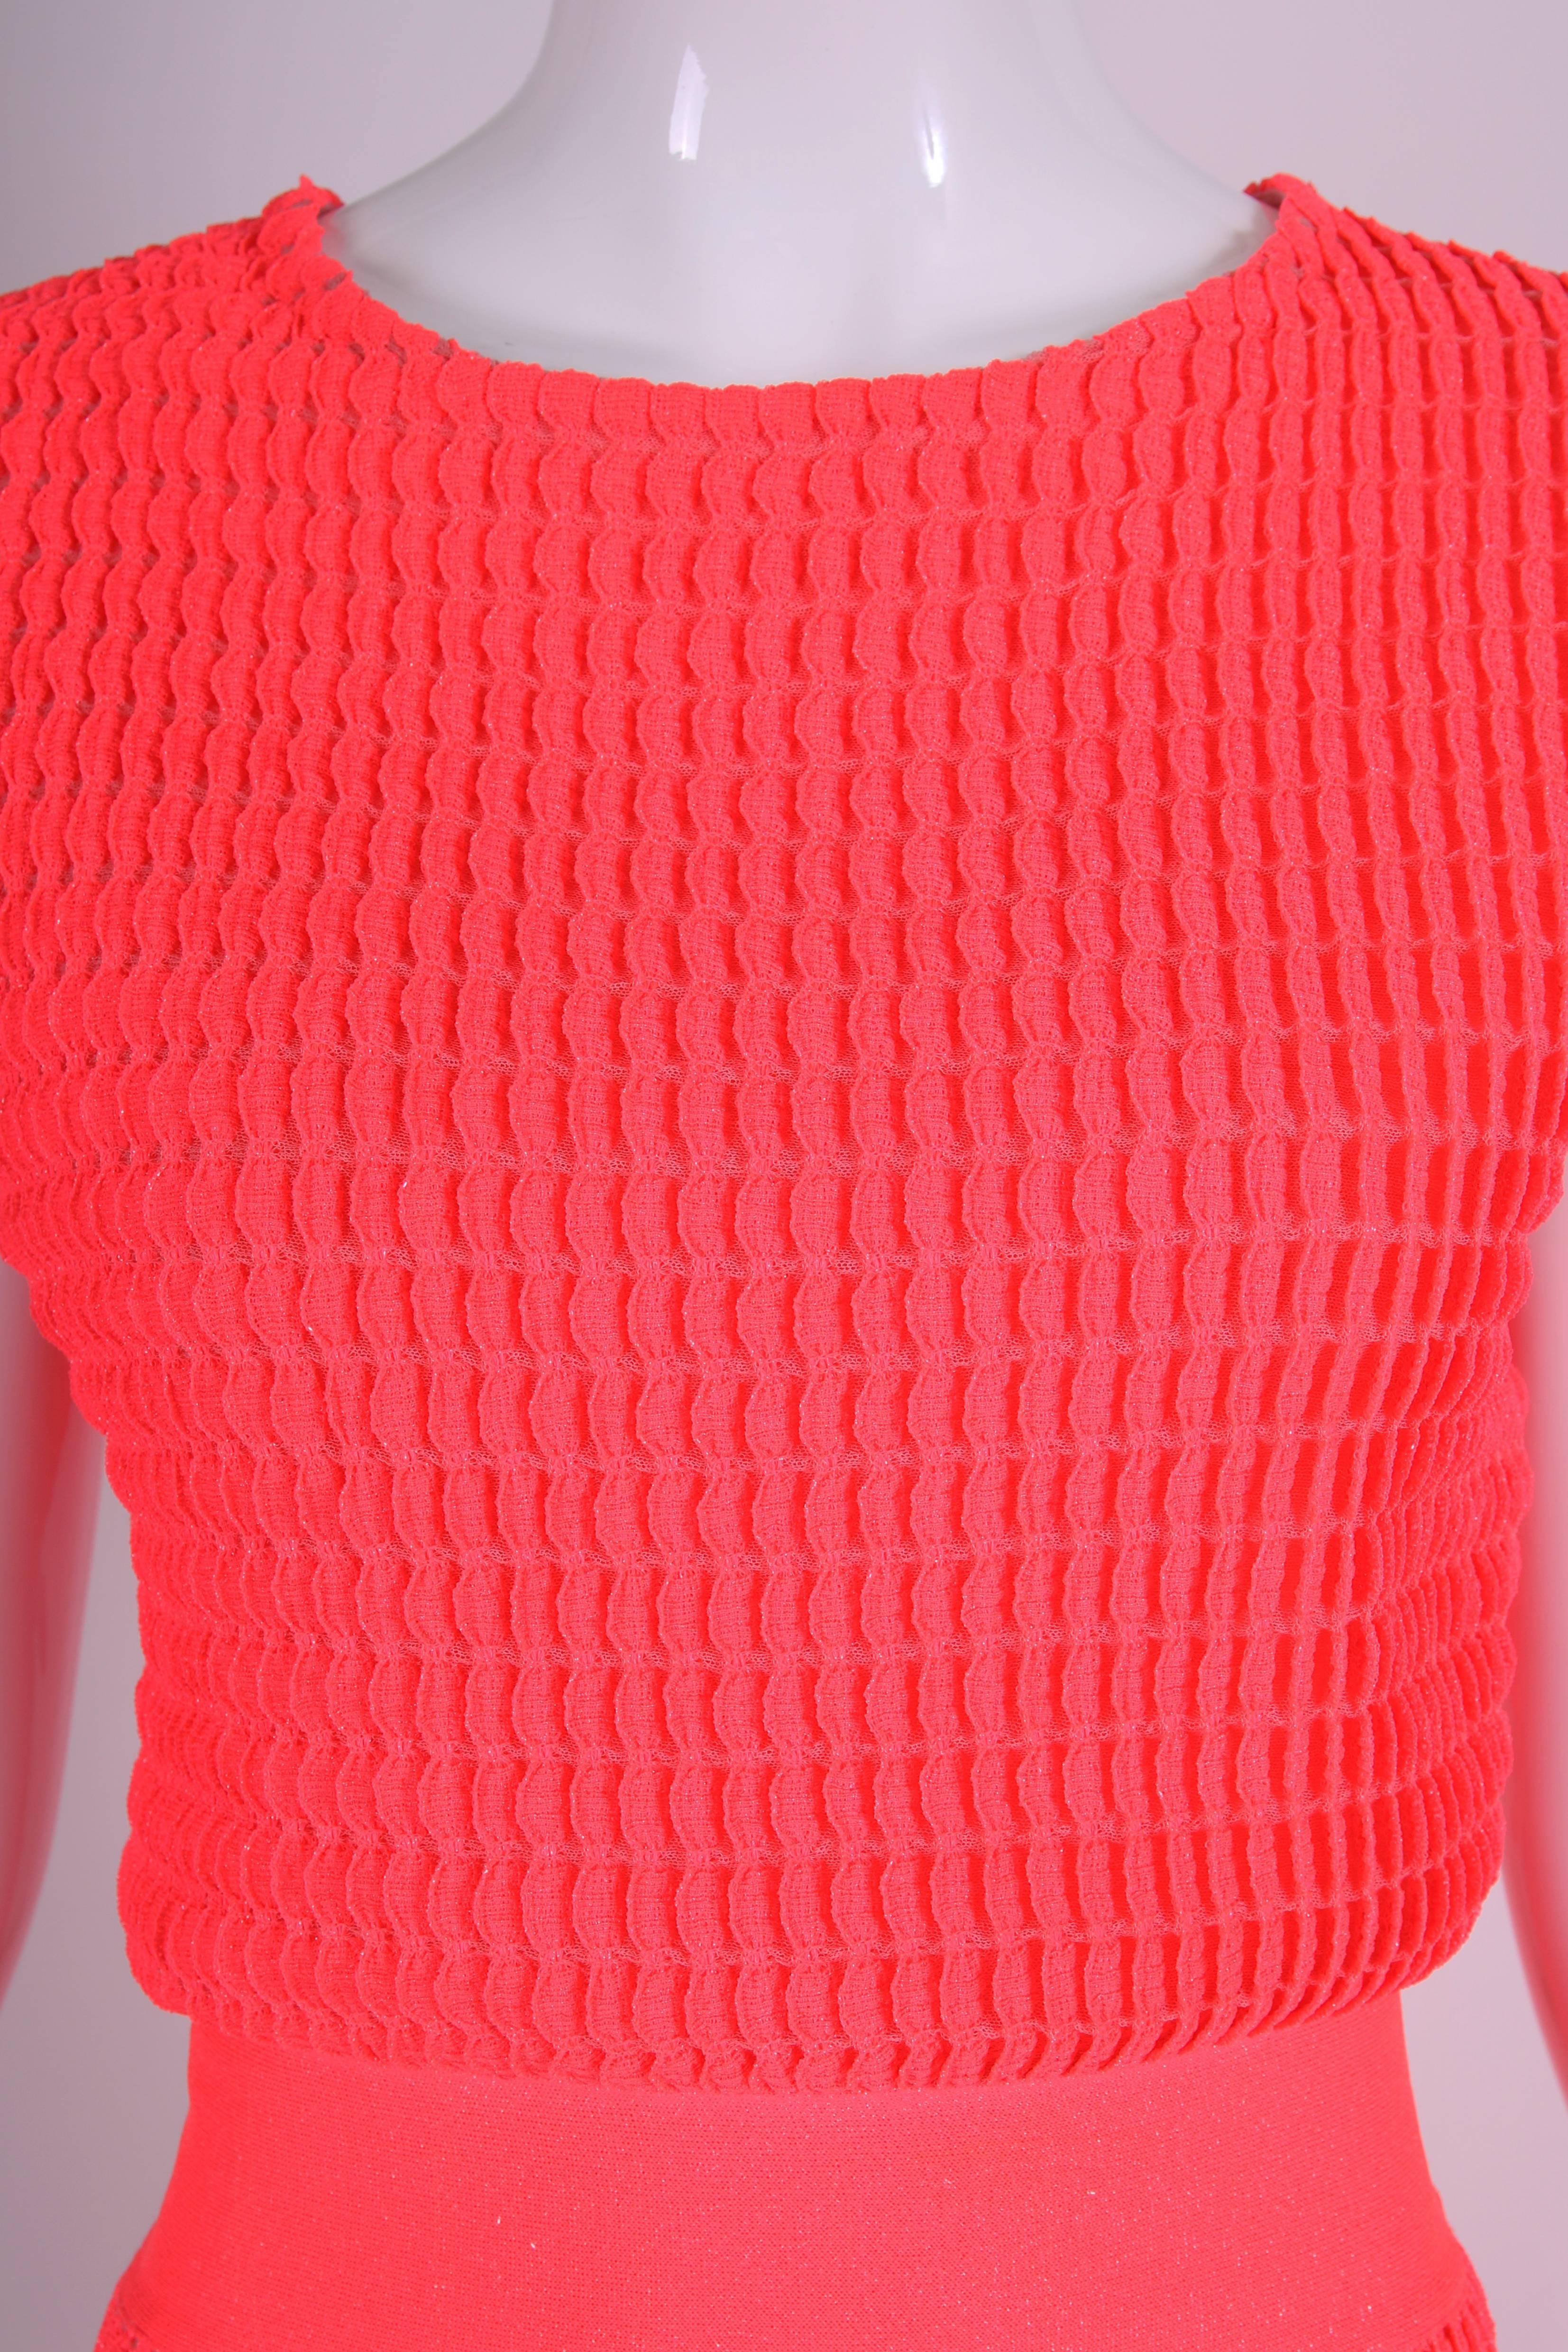 2013 Christian Dior by Raf Simons Neon Pink Textured Stretch Cocktail Day Dress 2